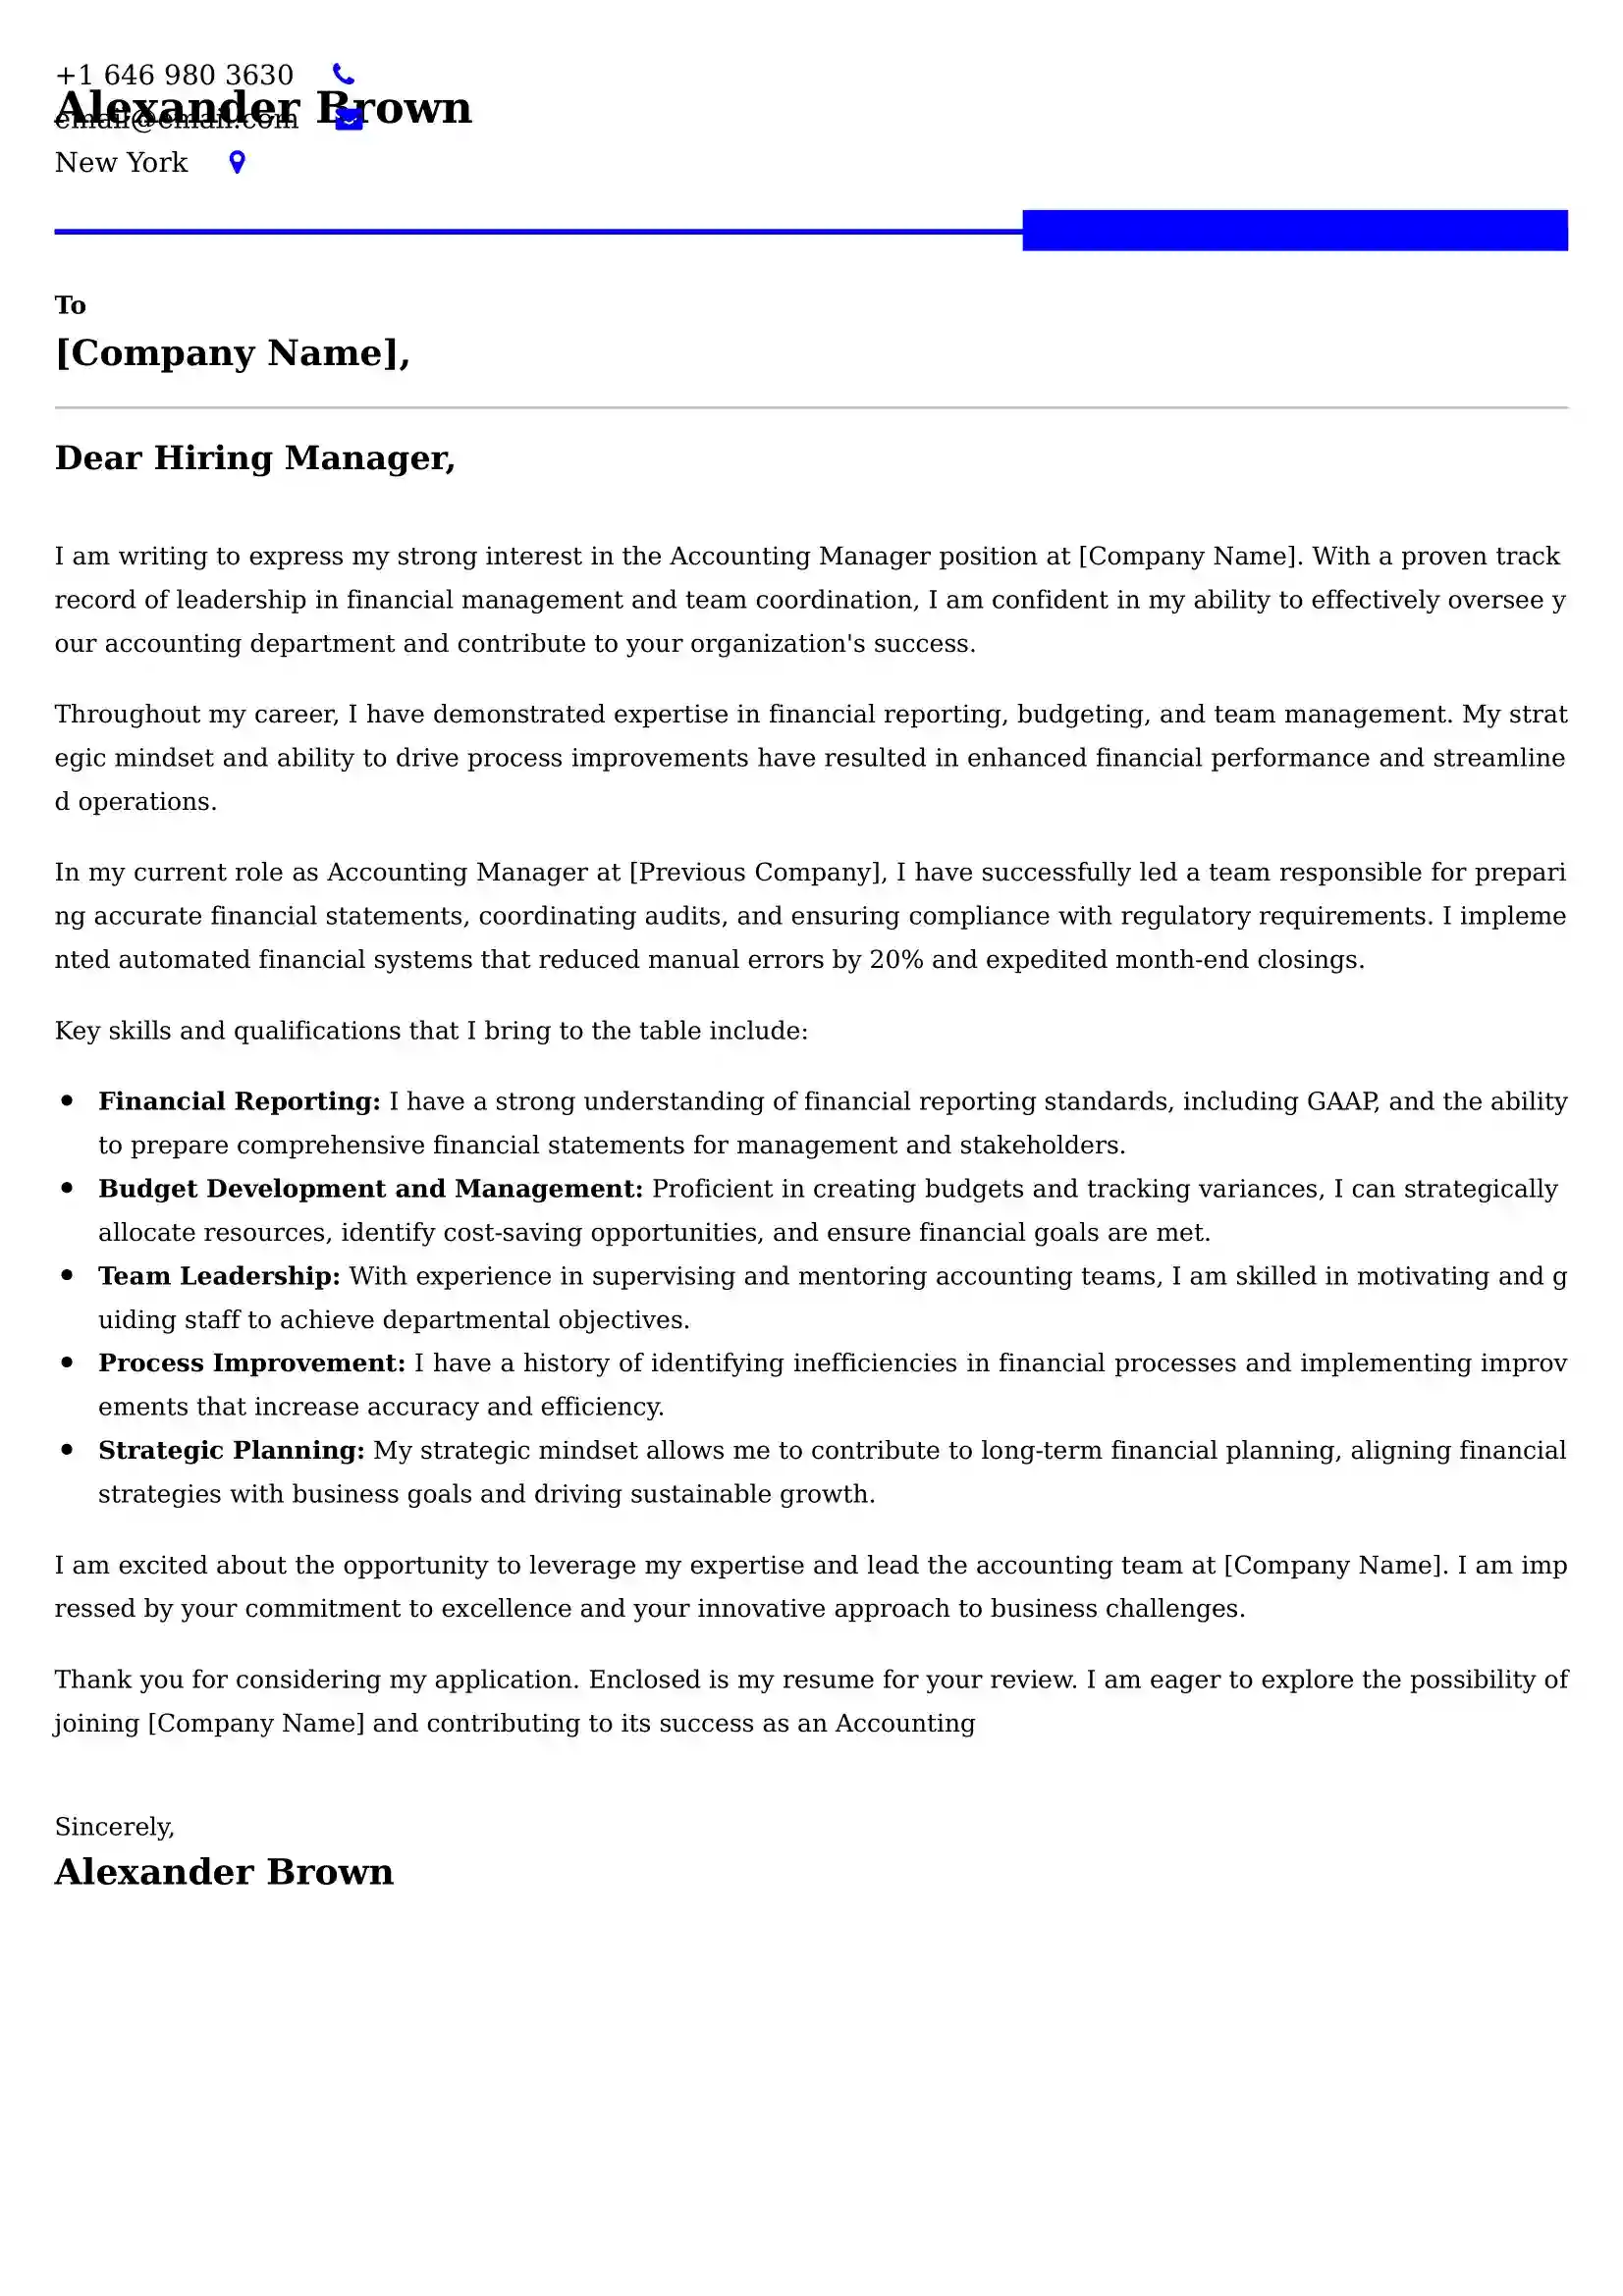 Accounting Manager Cover Letter Samples Canada